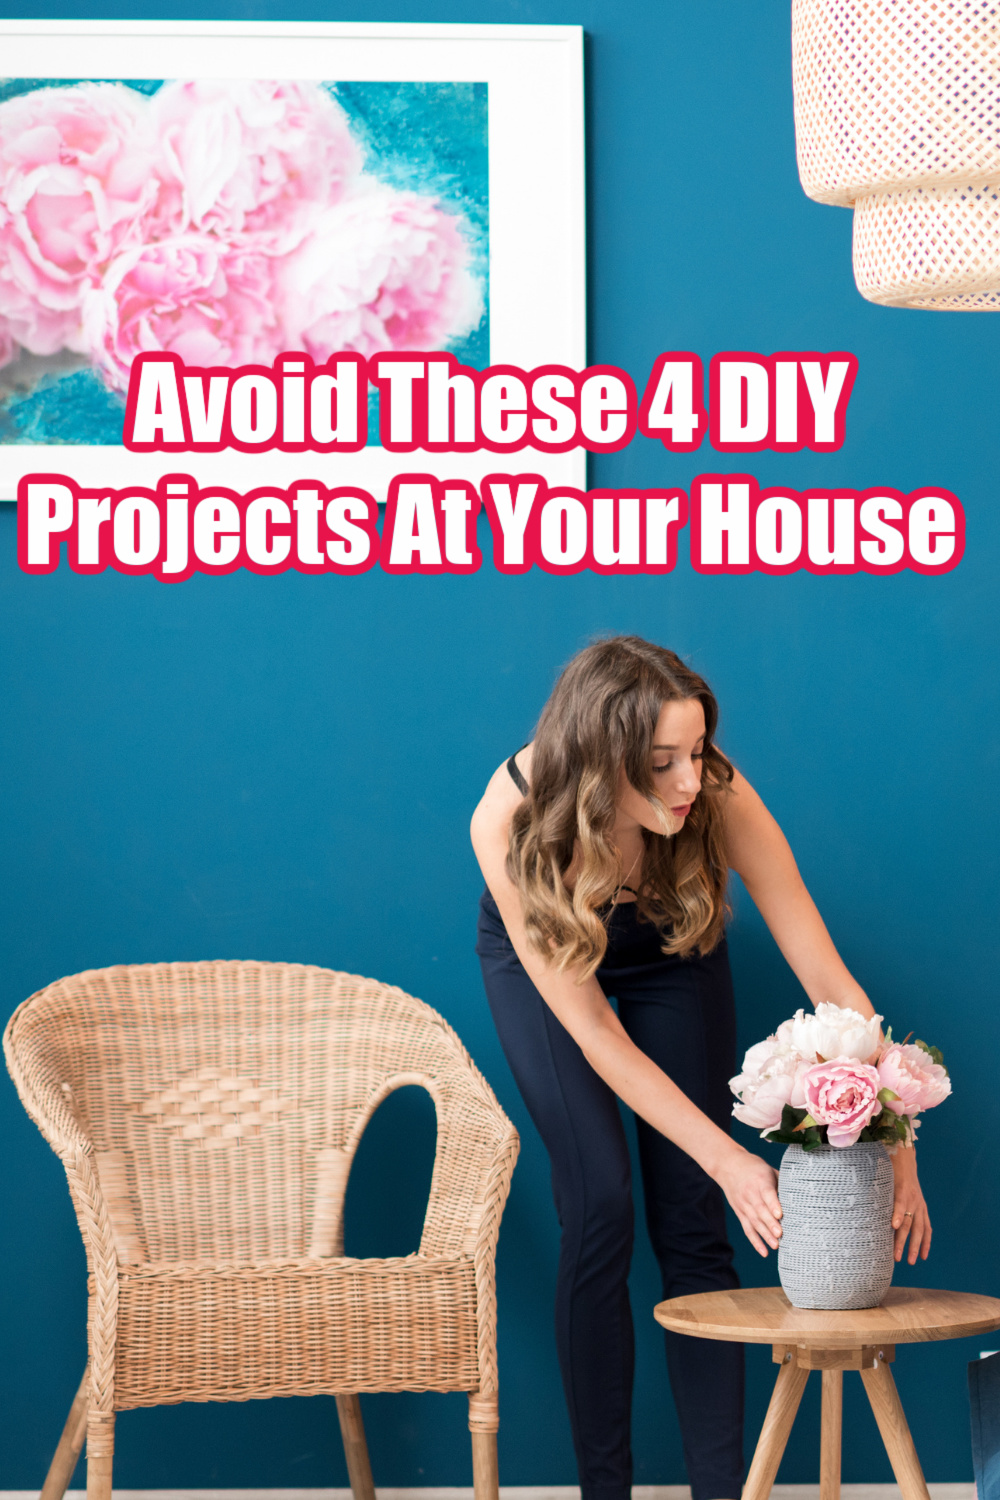 Avoid these 4 DIY Projects at your house